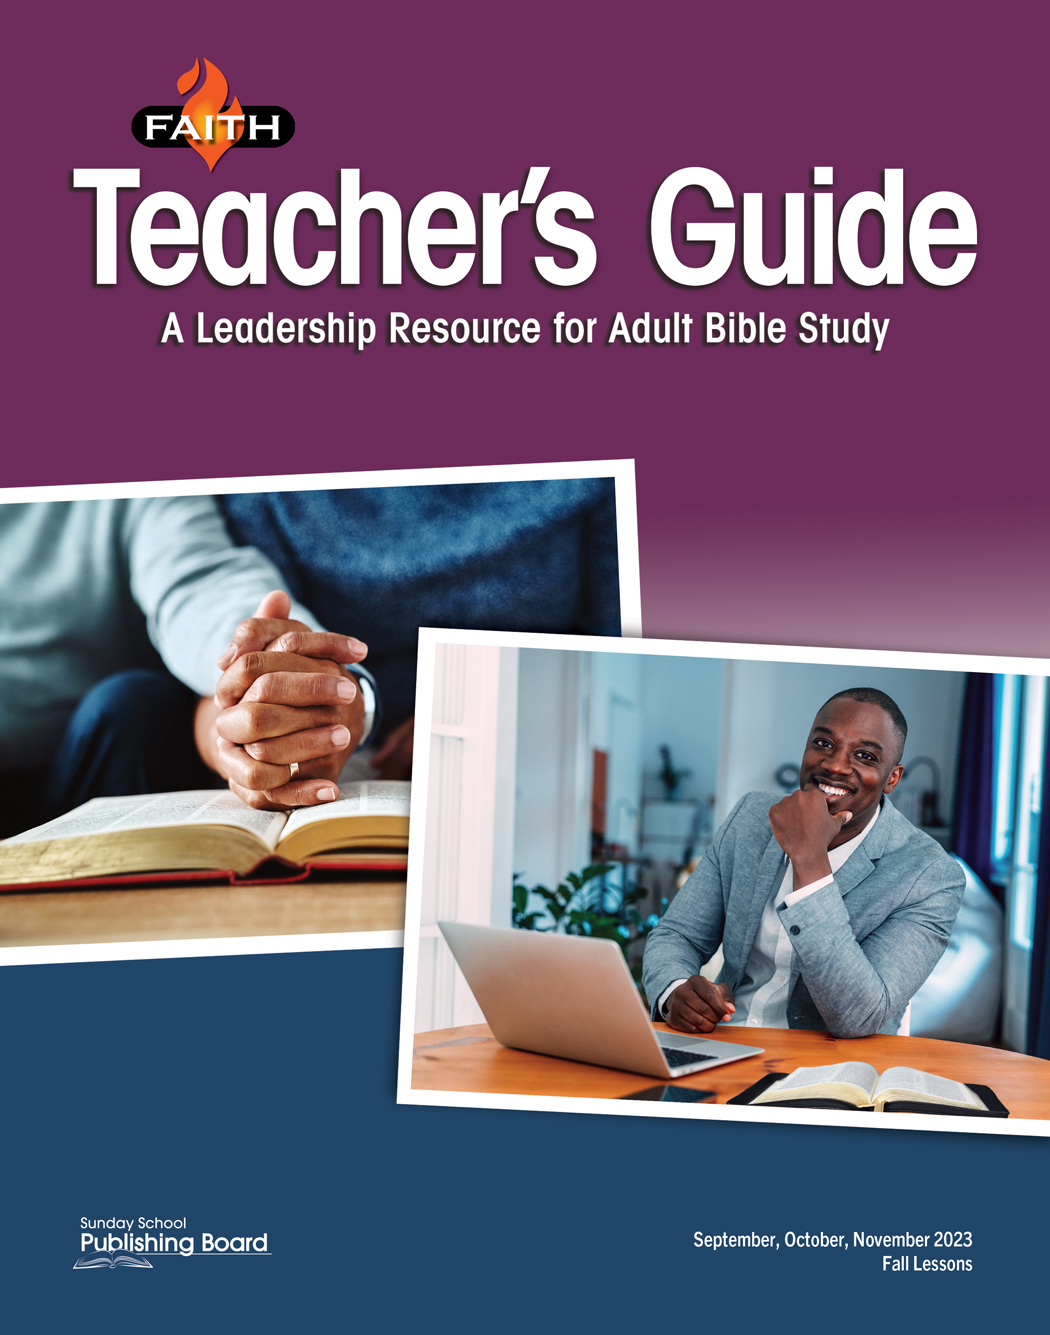 Category: Teacher's Guides